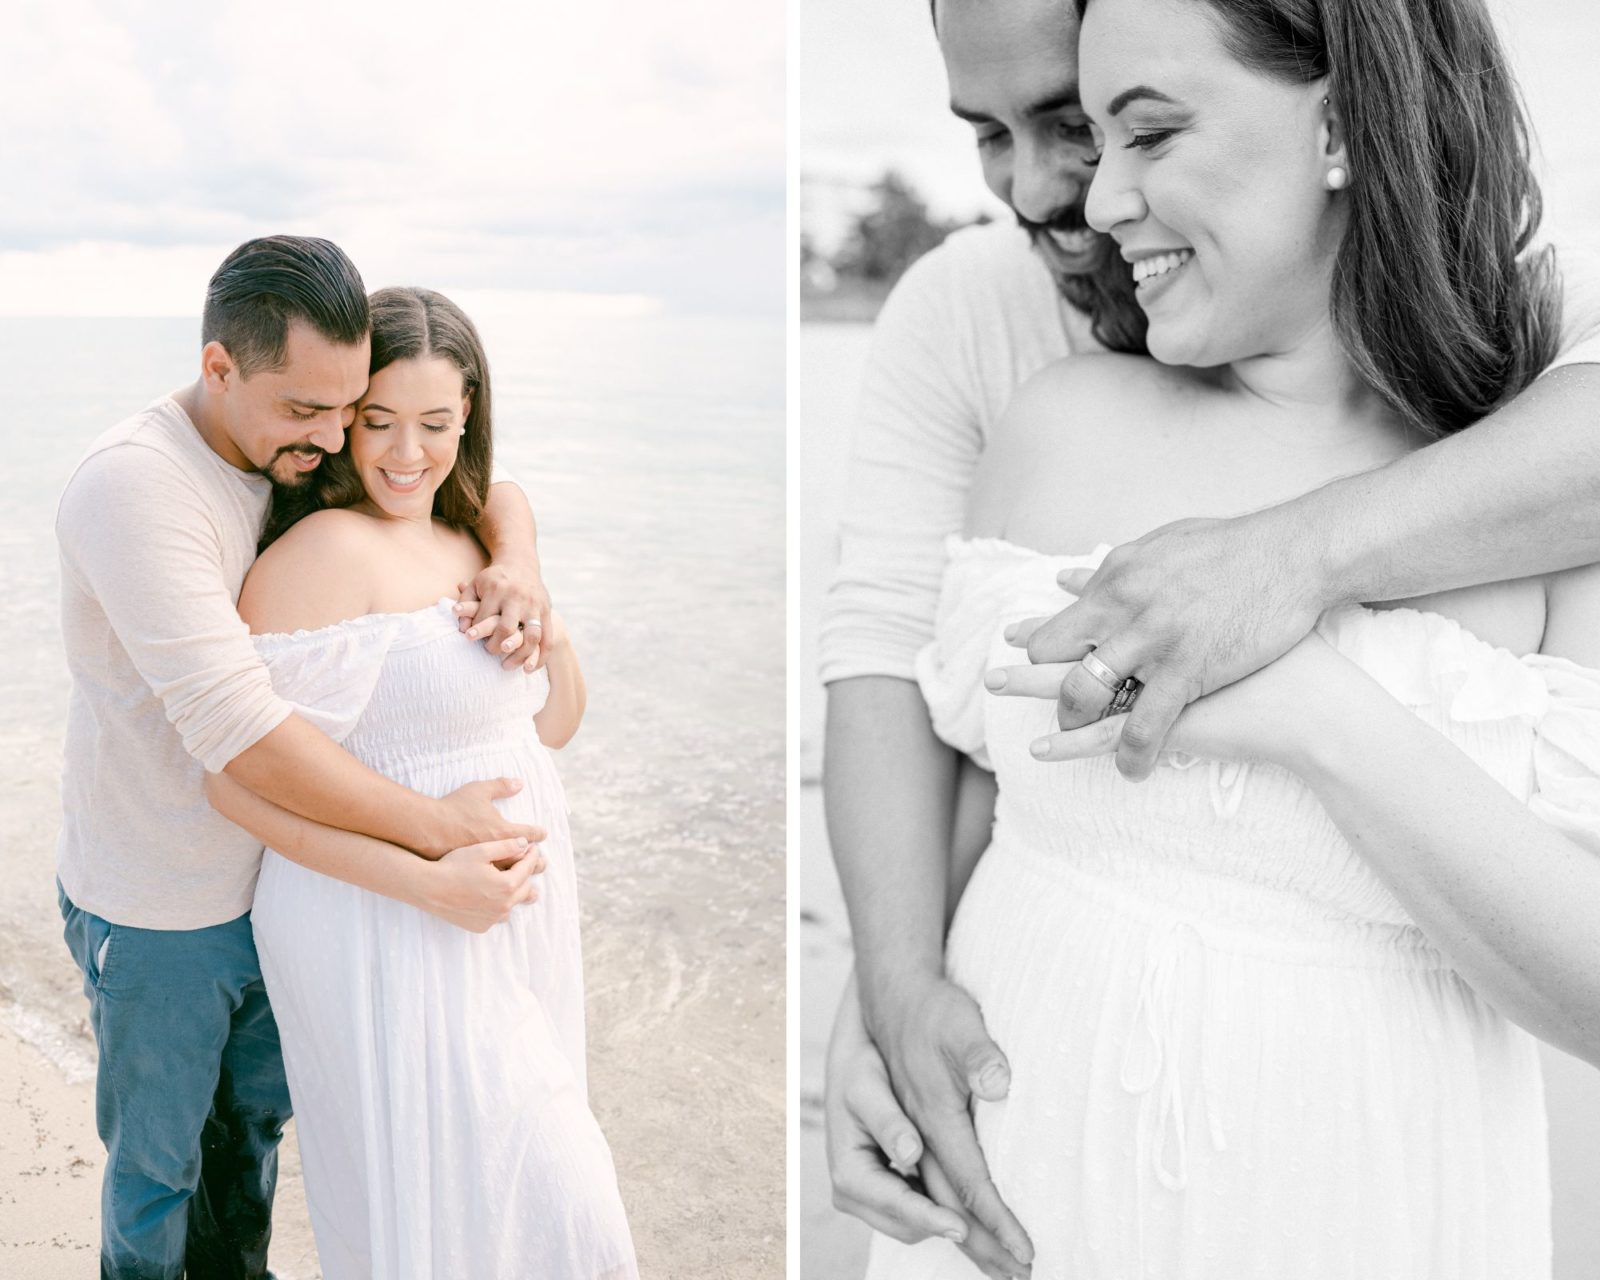 Pregnancy announcement picture ideas with your husband